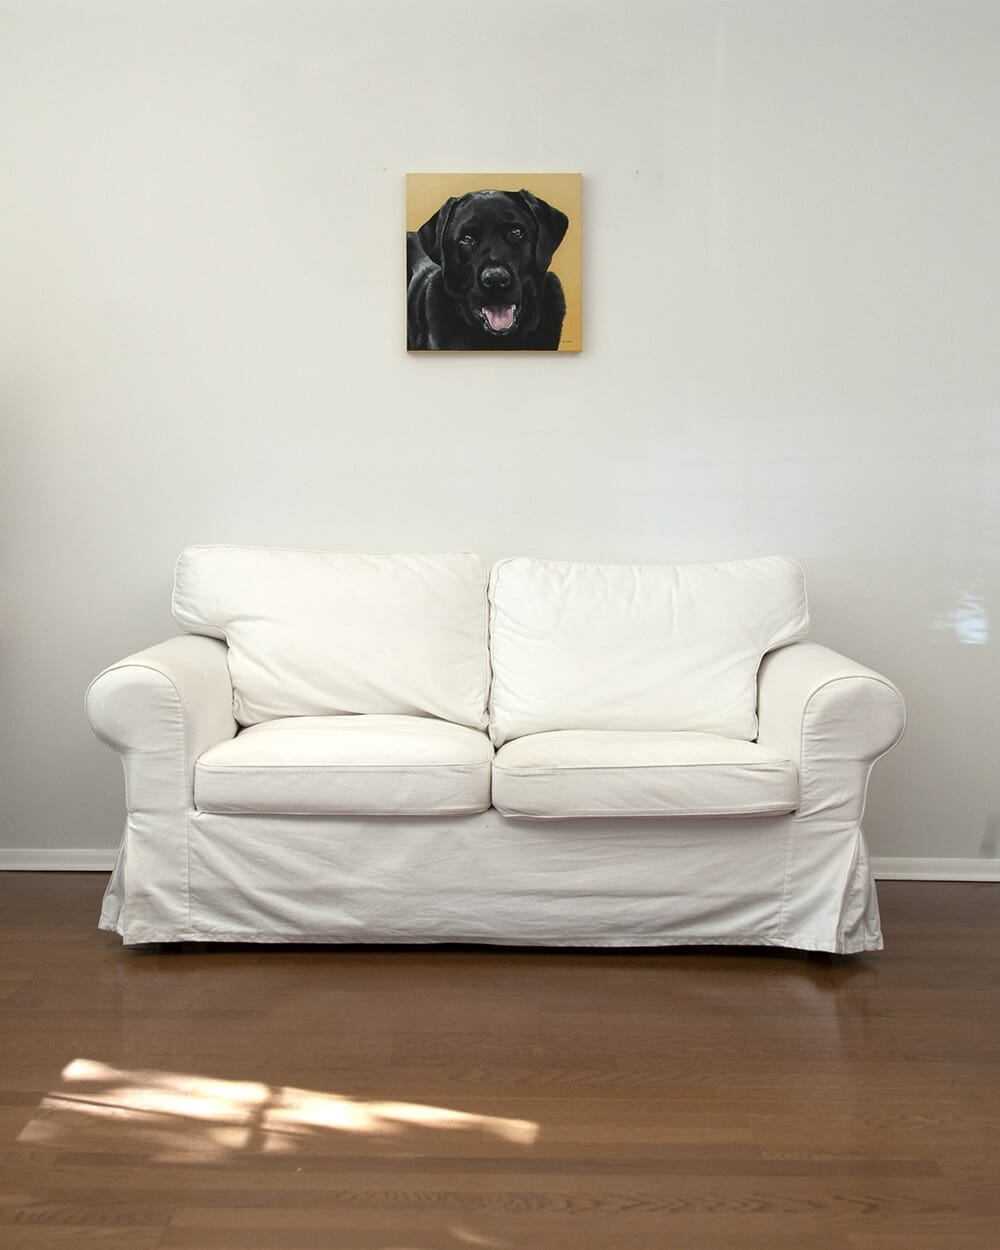 Pet portrait of a french bulldog by artist Erica Eriksdotter and a chair